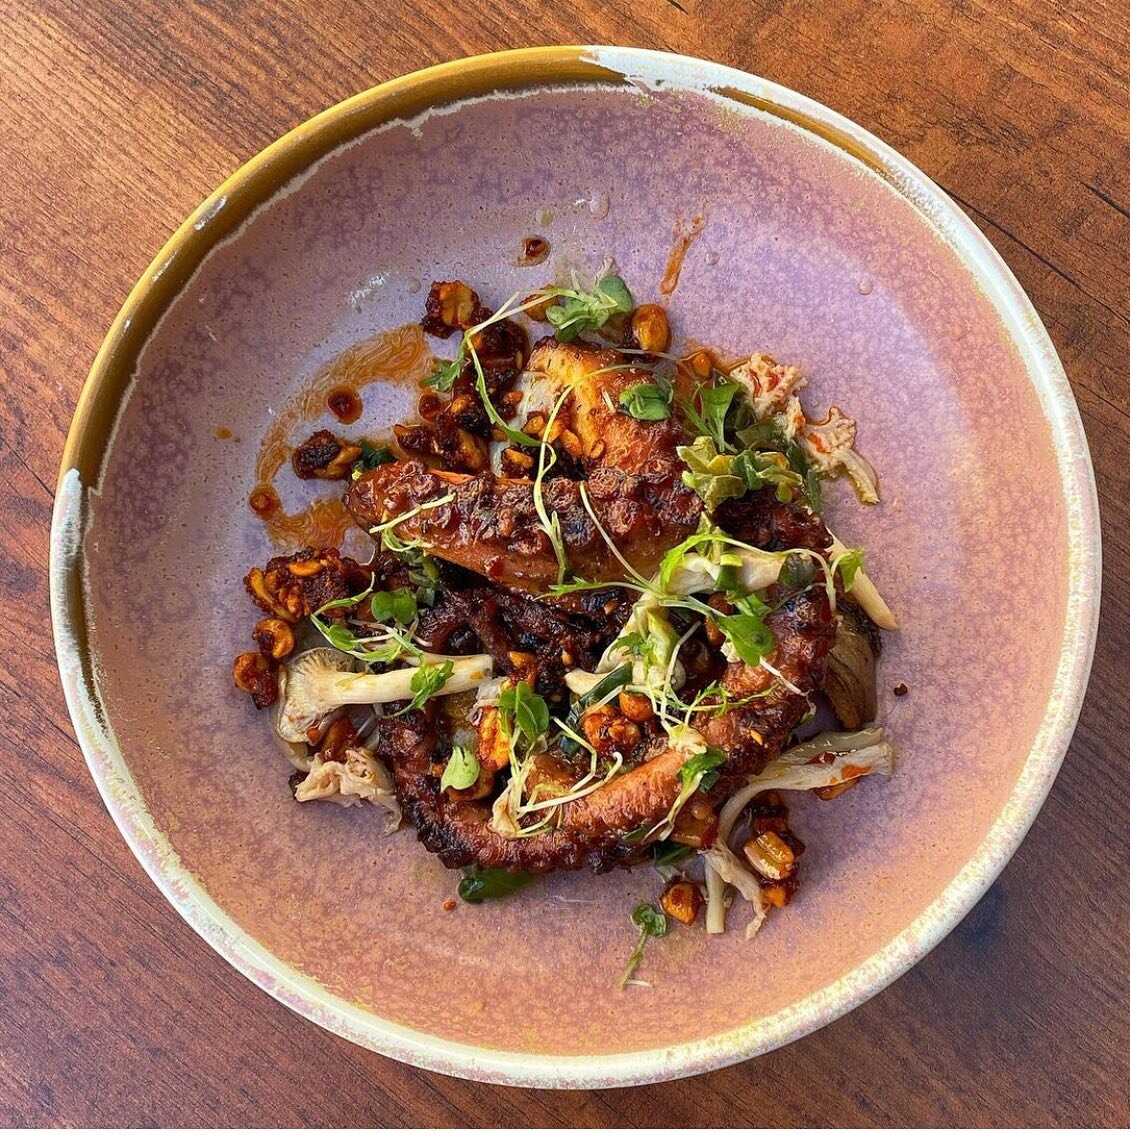 Happy Tuesday Freo Town. Despite the heat our little kitchen garden has been going gangbusters  with plenty of green herbs and clawberry bringing extra zing to the native salsa on our masala octopus. 

Open from 5 for bookings and walk ins and we&rsq